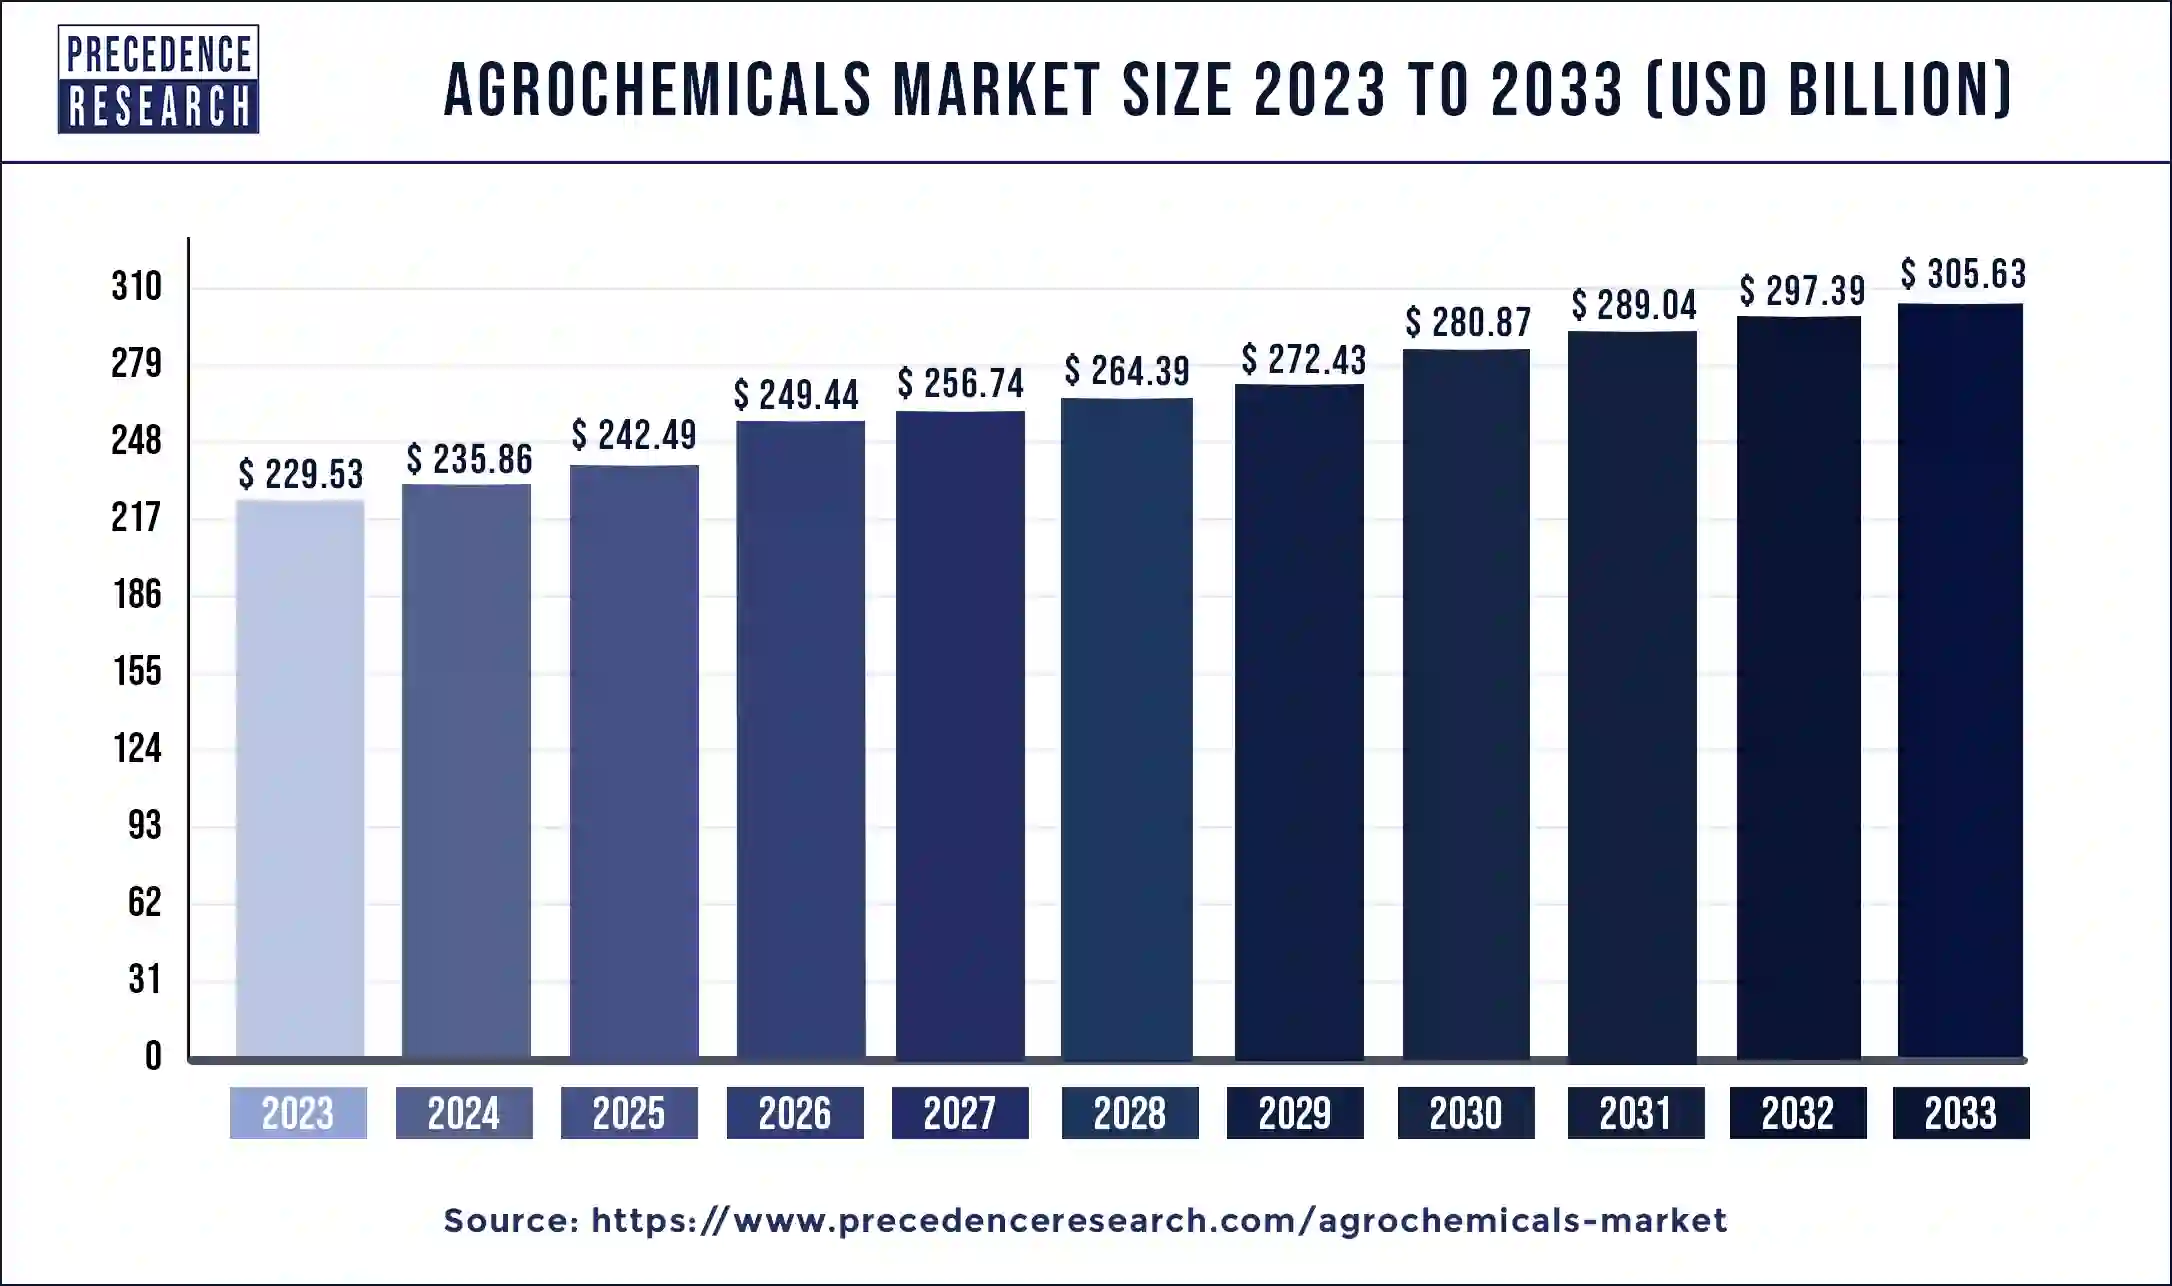 Agrochemicals Market Size 2024 to 2033